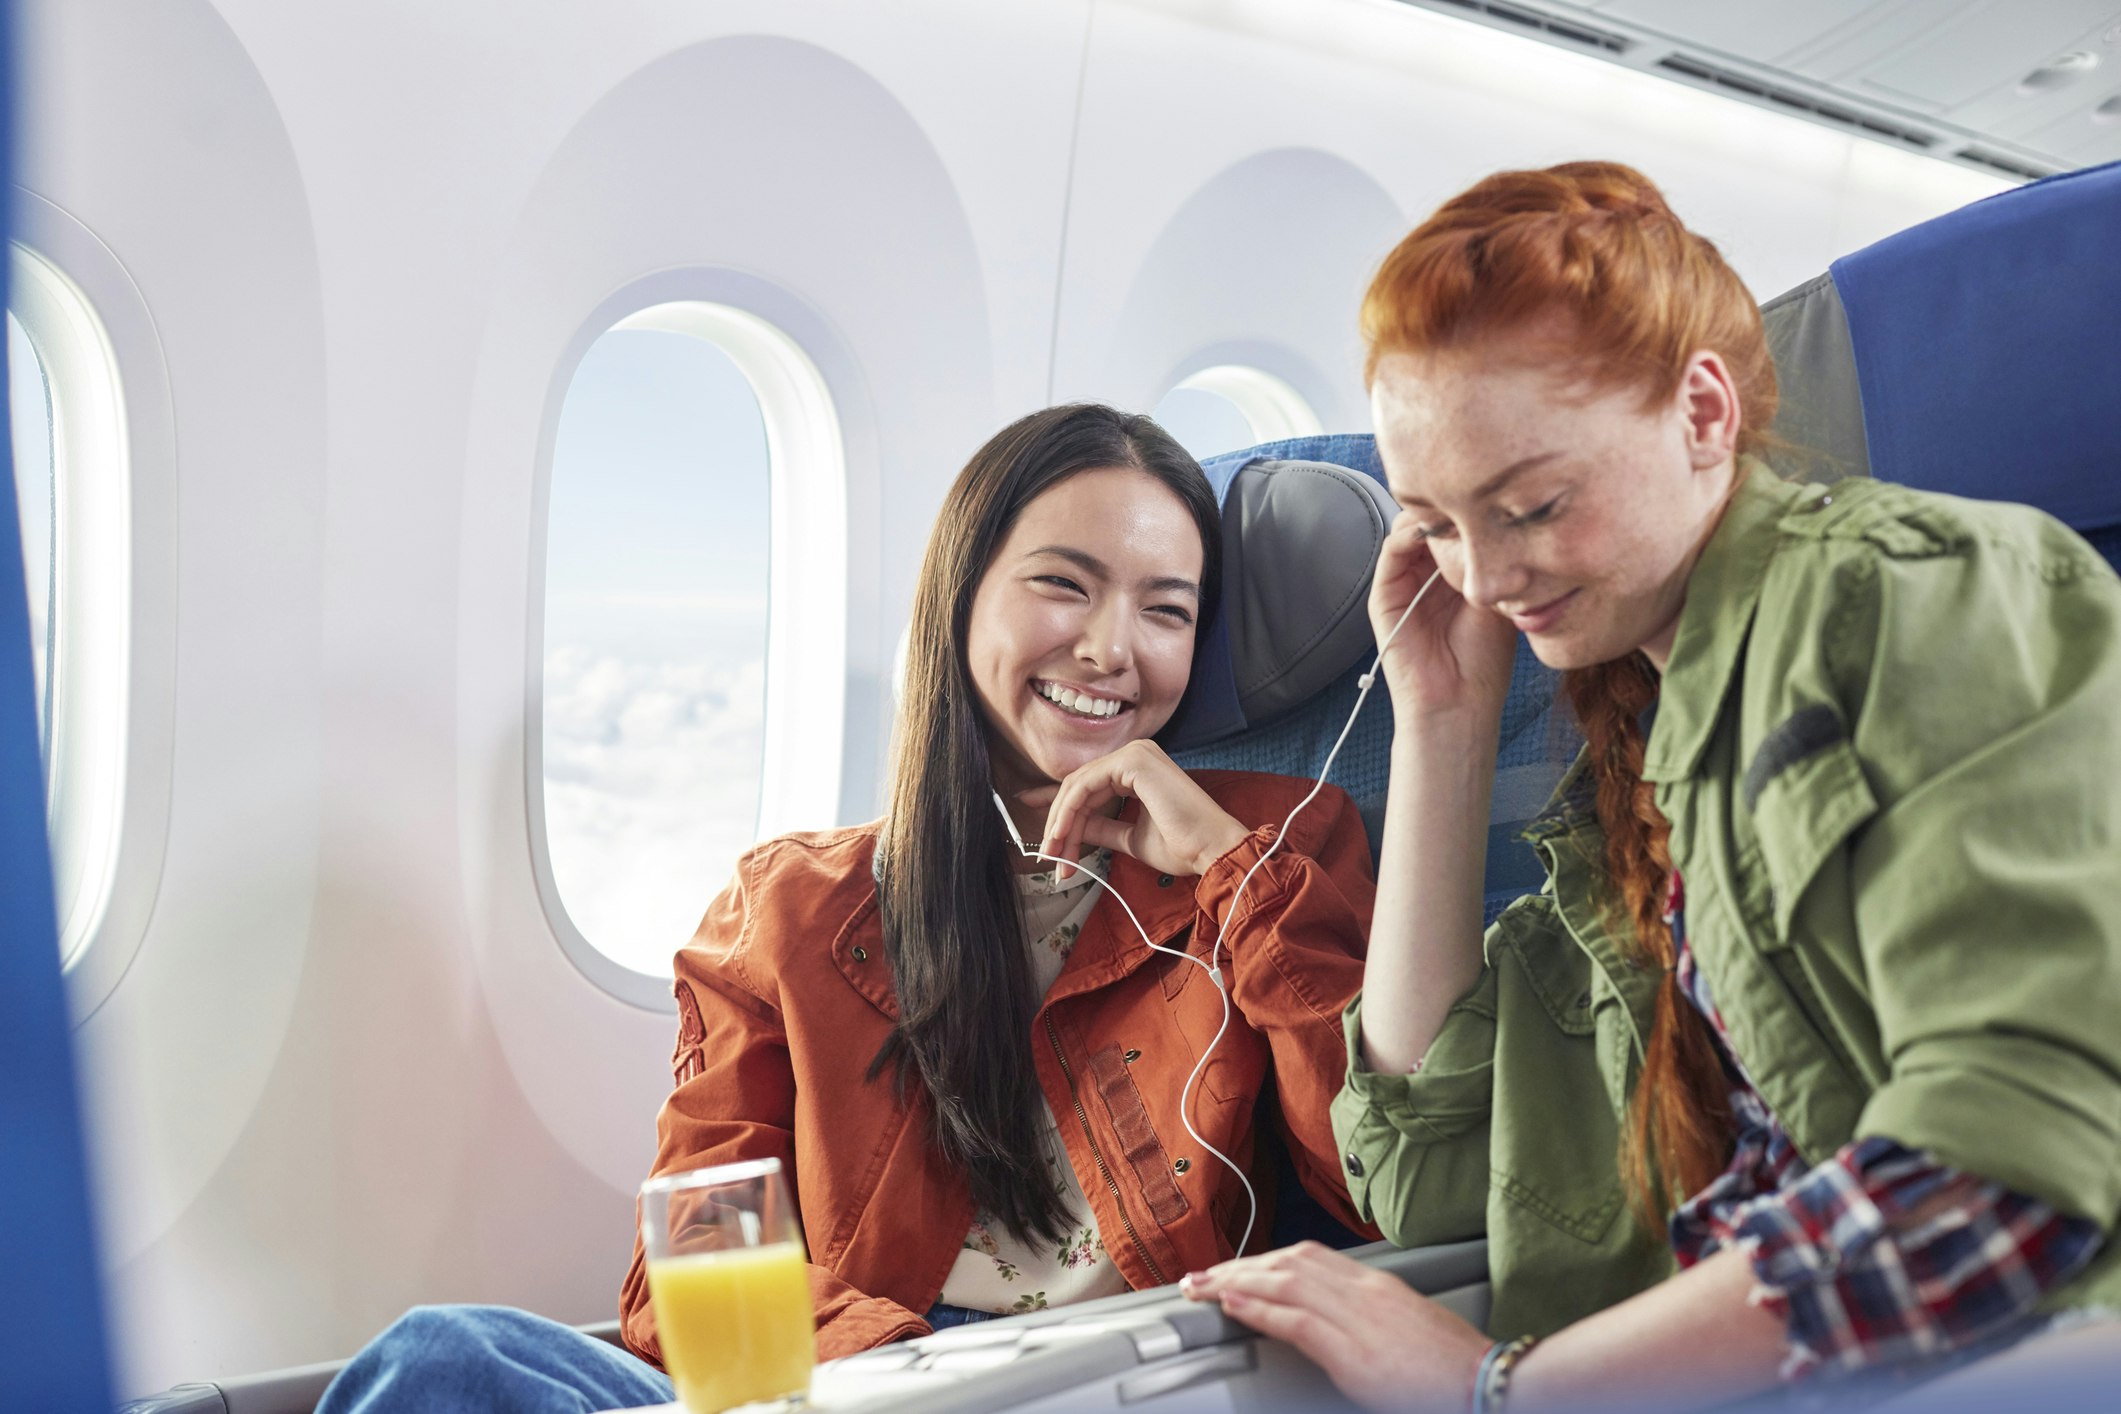 Young women friends sharing headphones, listening to music on airplane